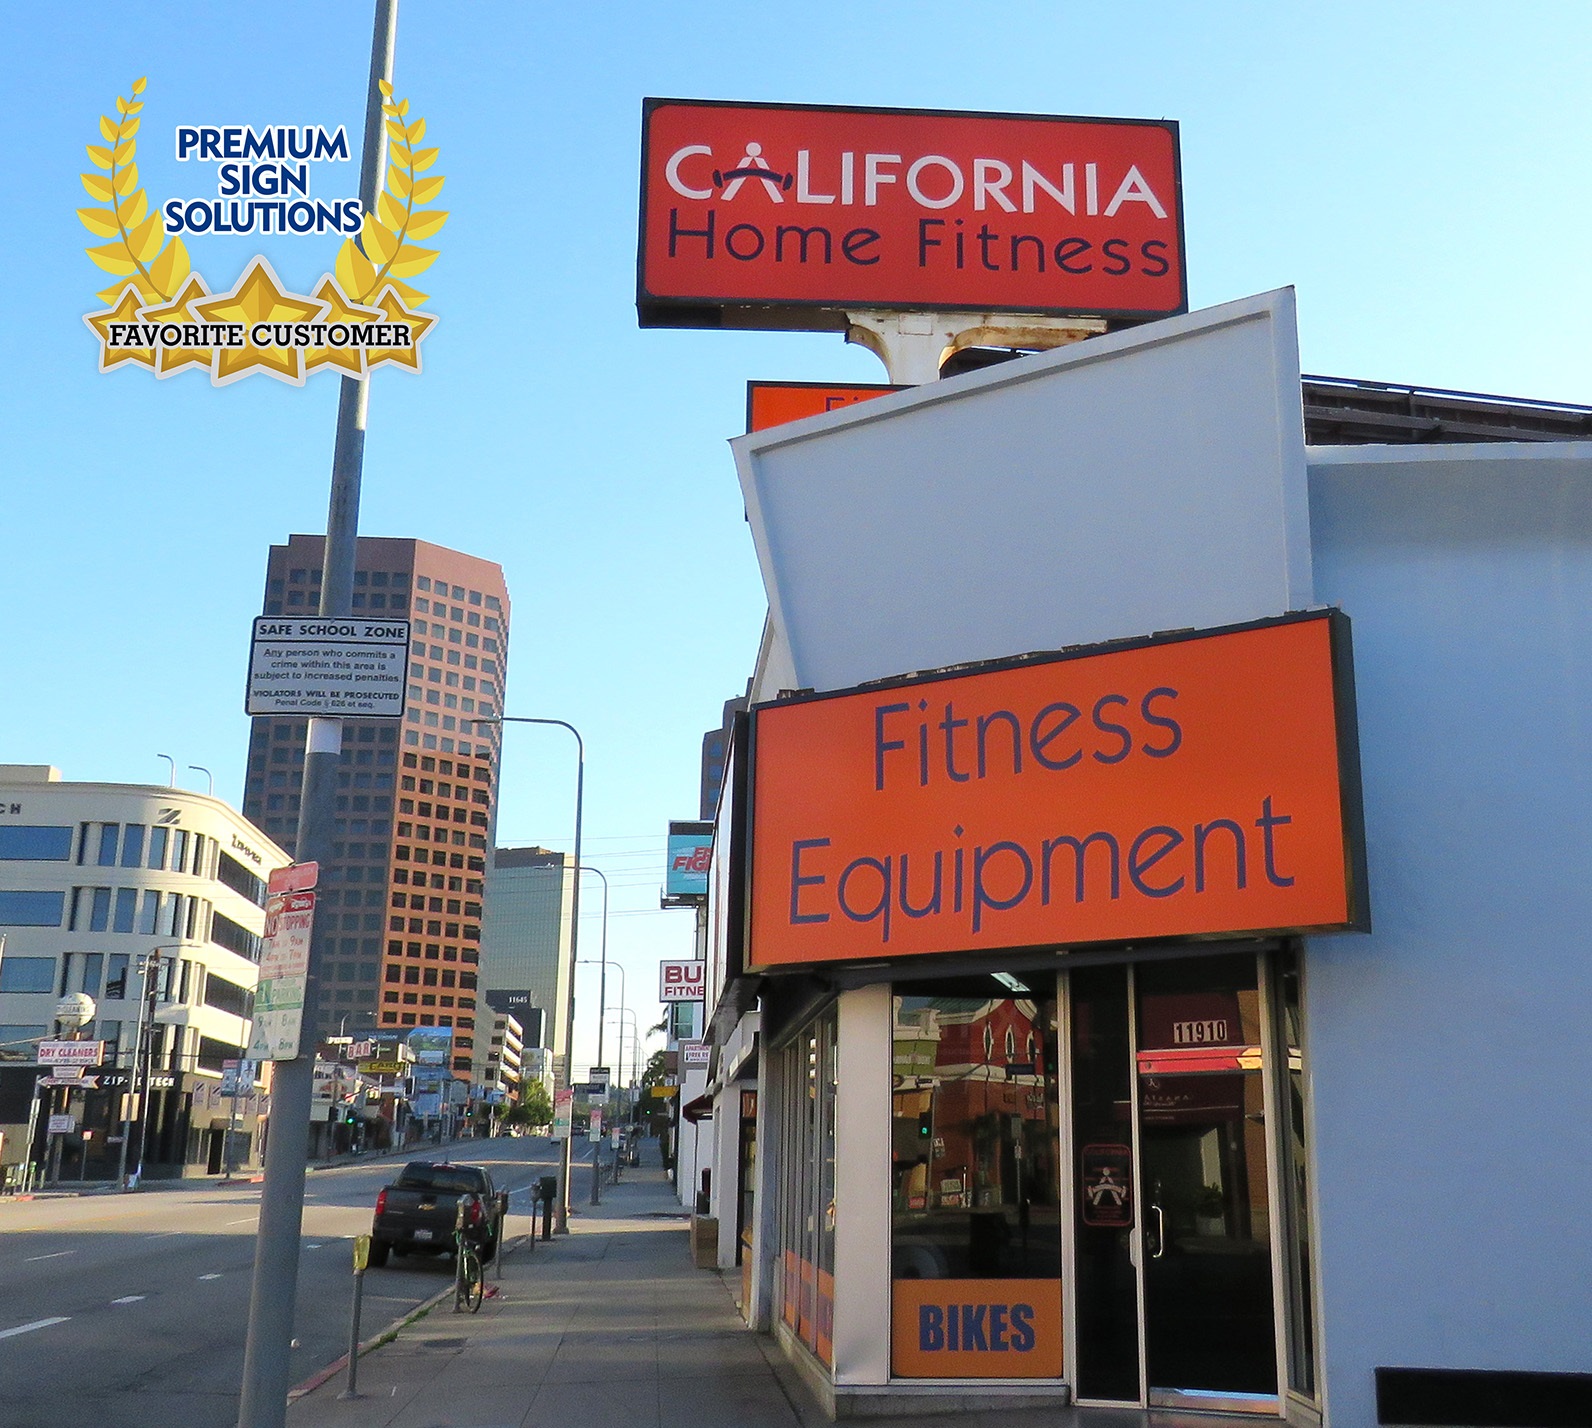 You are currently viewing Our Favorite Customers: California Home Fitness